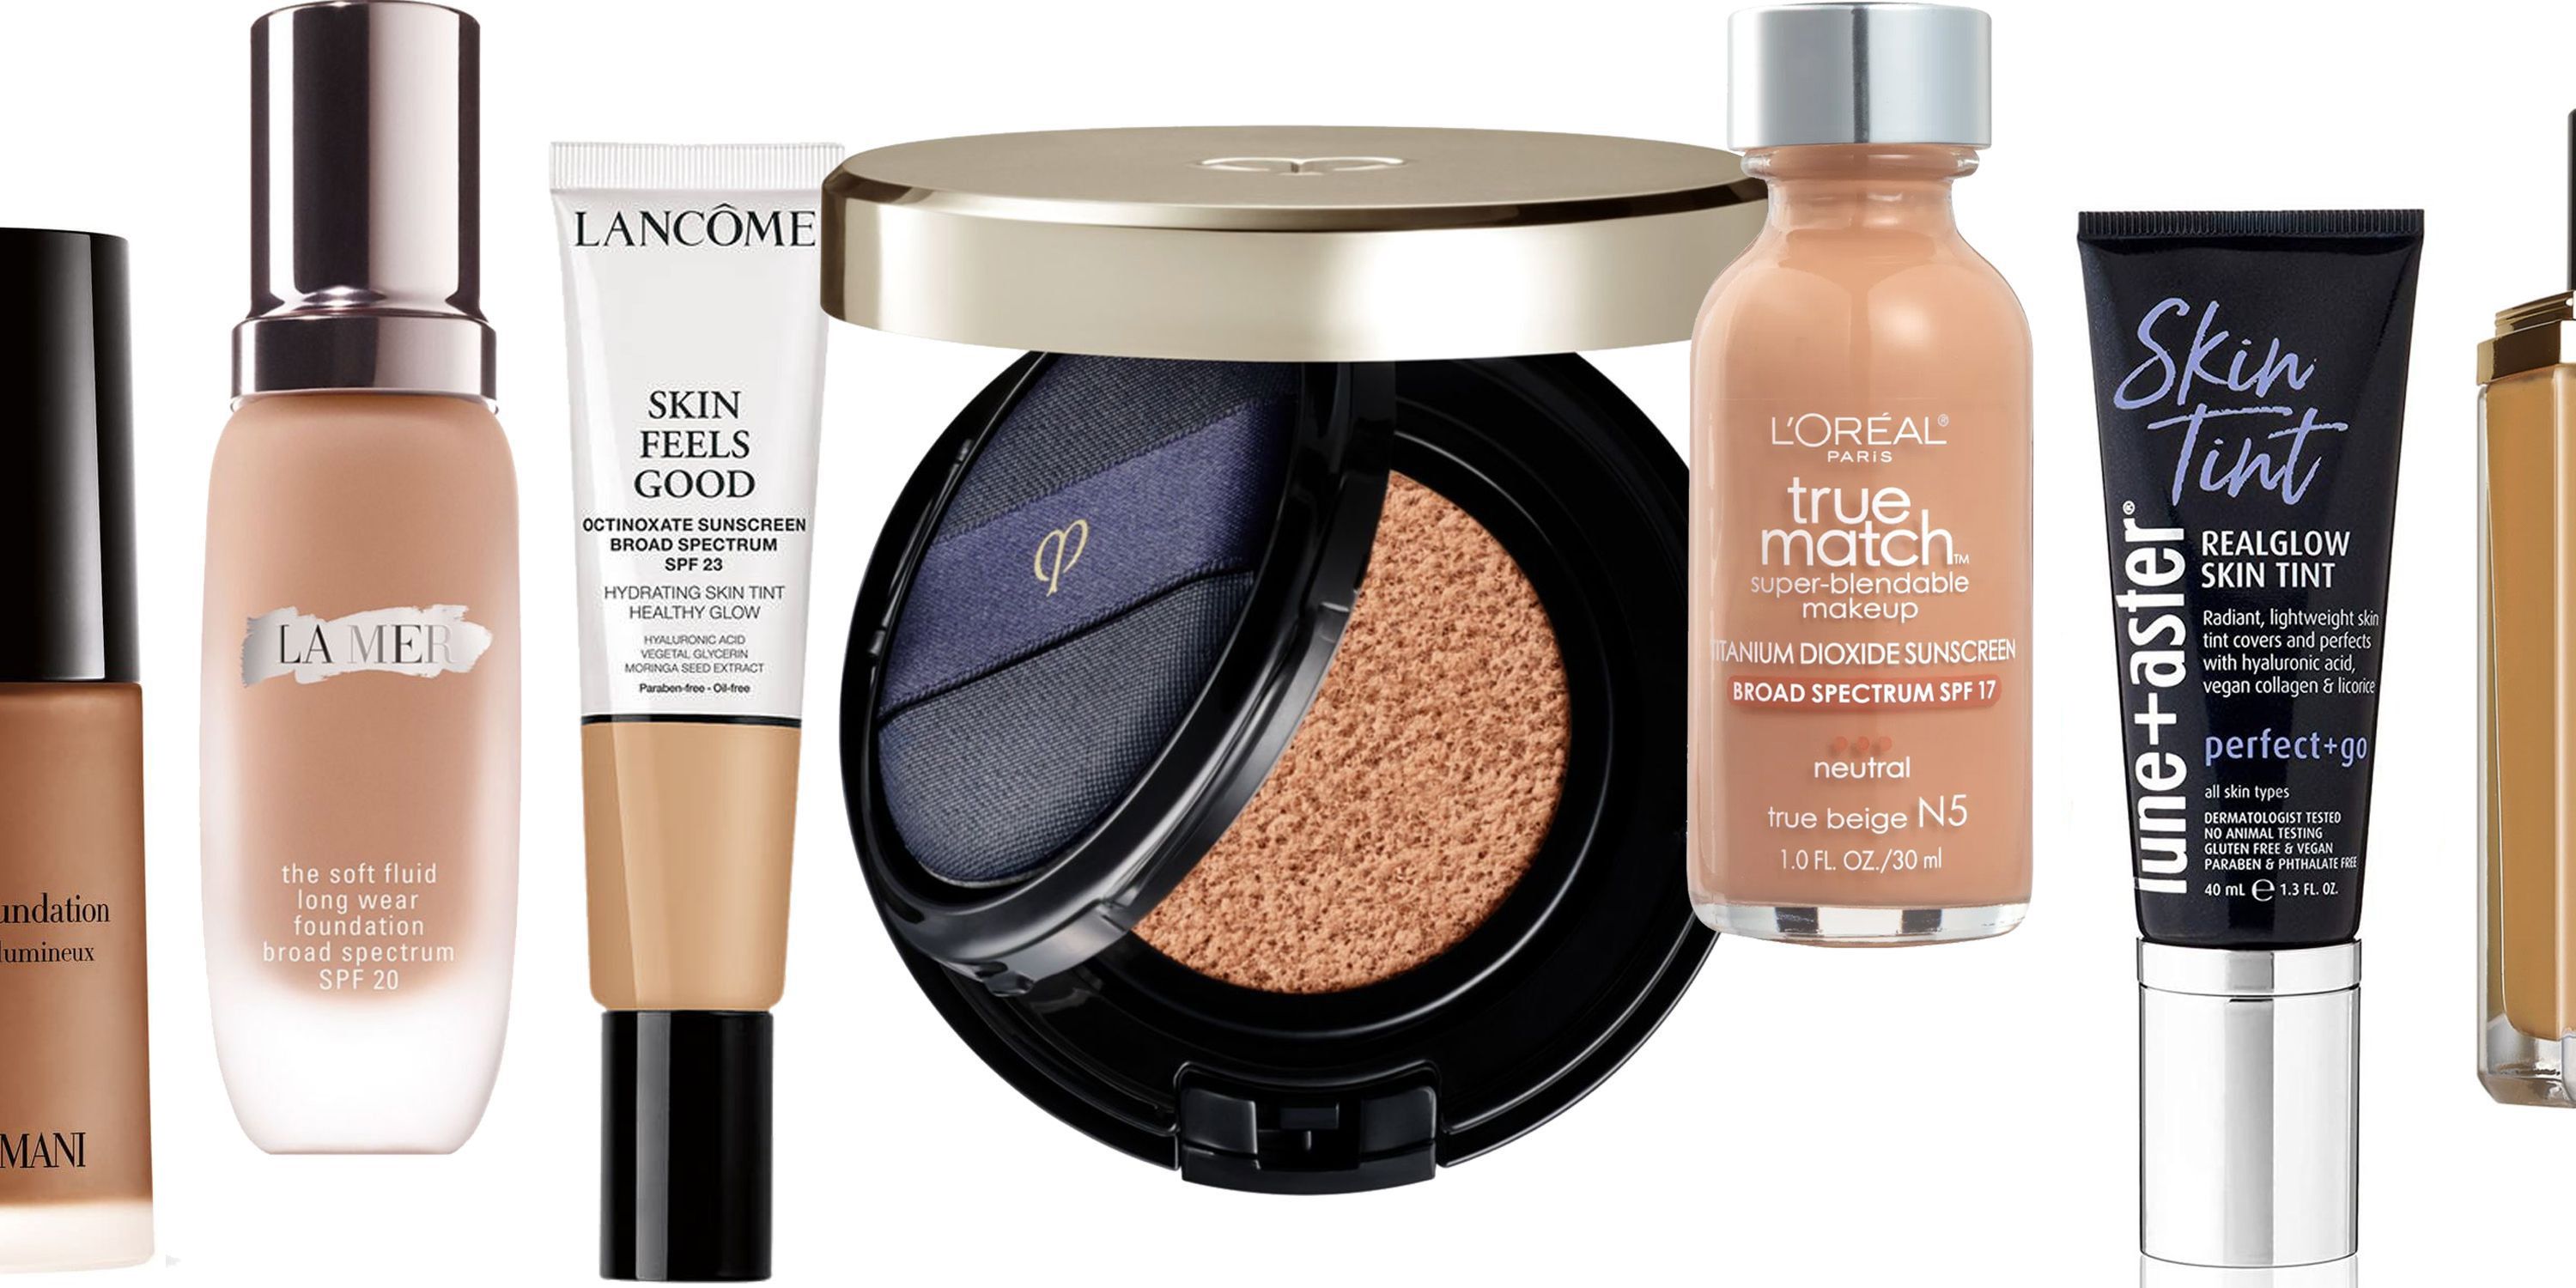 This Is How To Choose The Best Liquid Foundations For Your Mature Skin